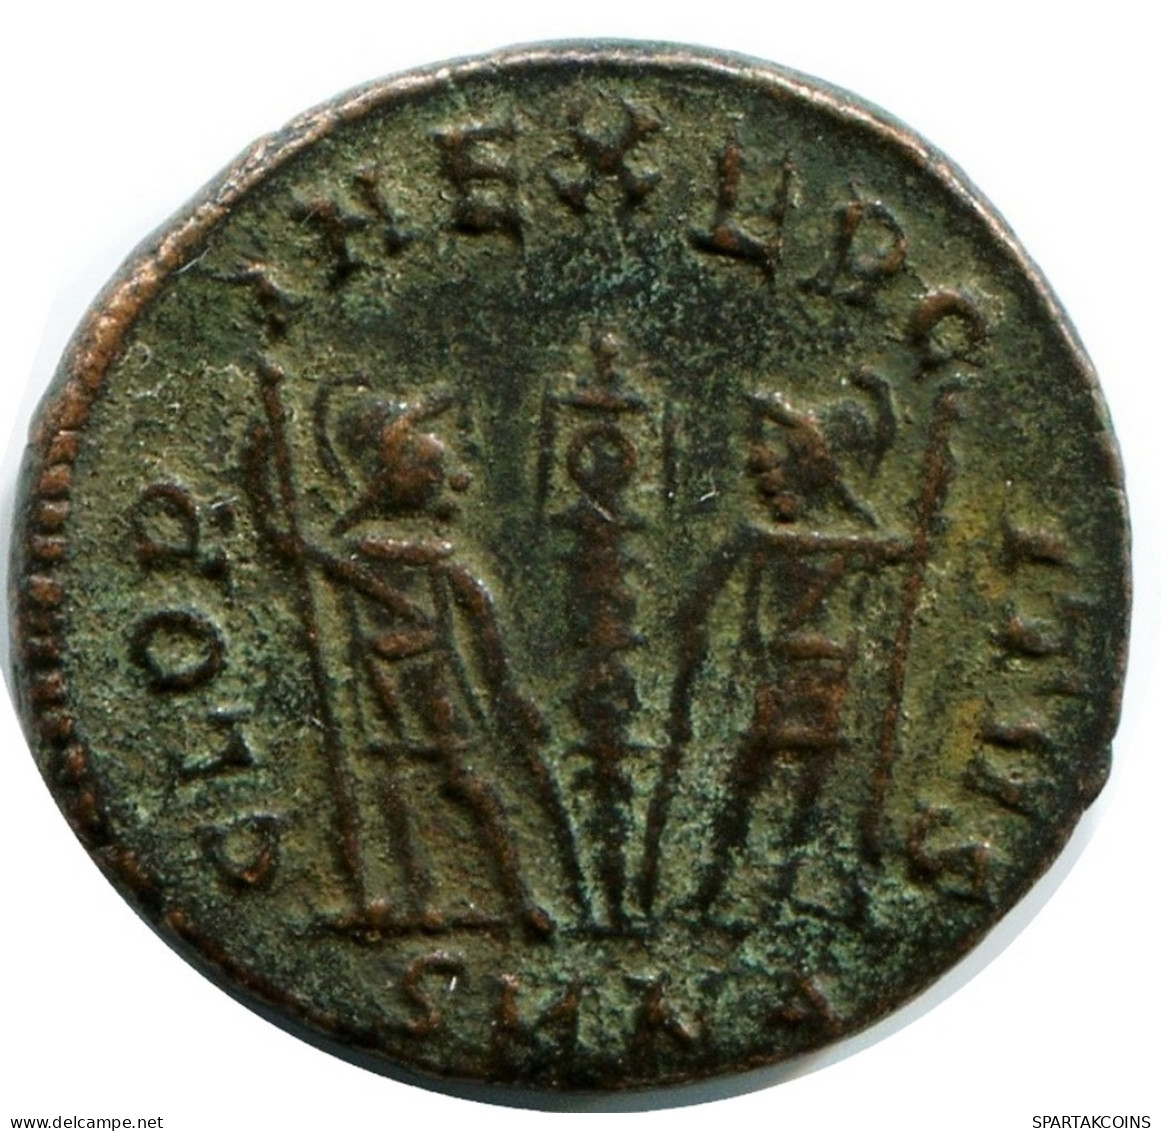 CONSTANS MINTED IN NICOMEDIA FOUND IN IHNASYAH HOARD EGYPT #ANC11755.14.E.A - The Christian Empire (307 AD Tot 363 AD)